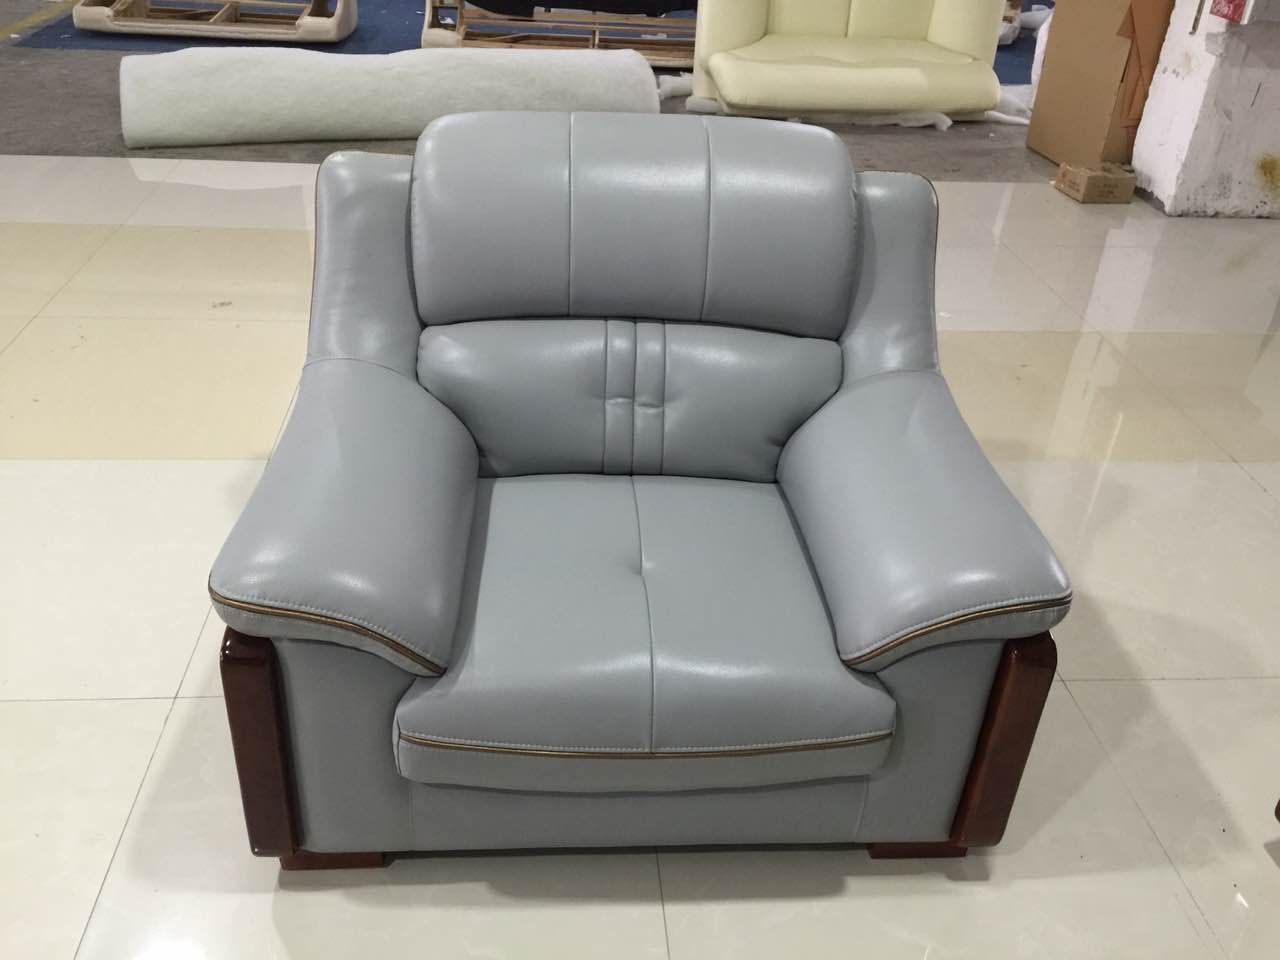 Good looking leather sofa comfortable one seater Comfortable Sofa, Sofa  Seats, Furniture Companies,